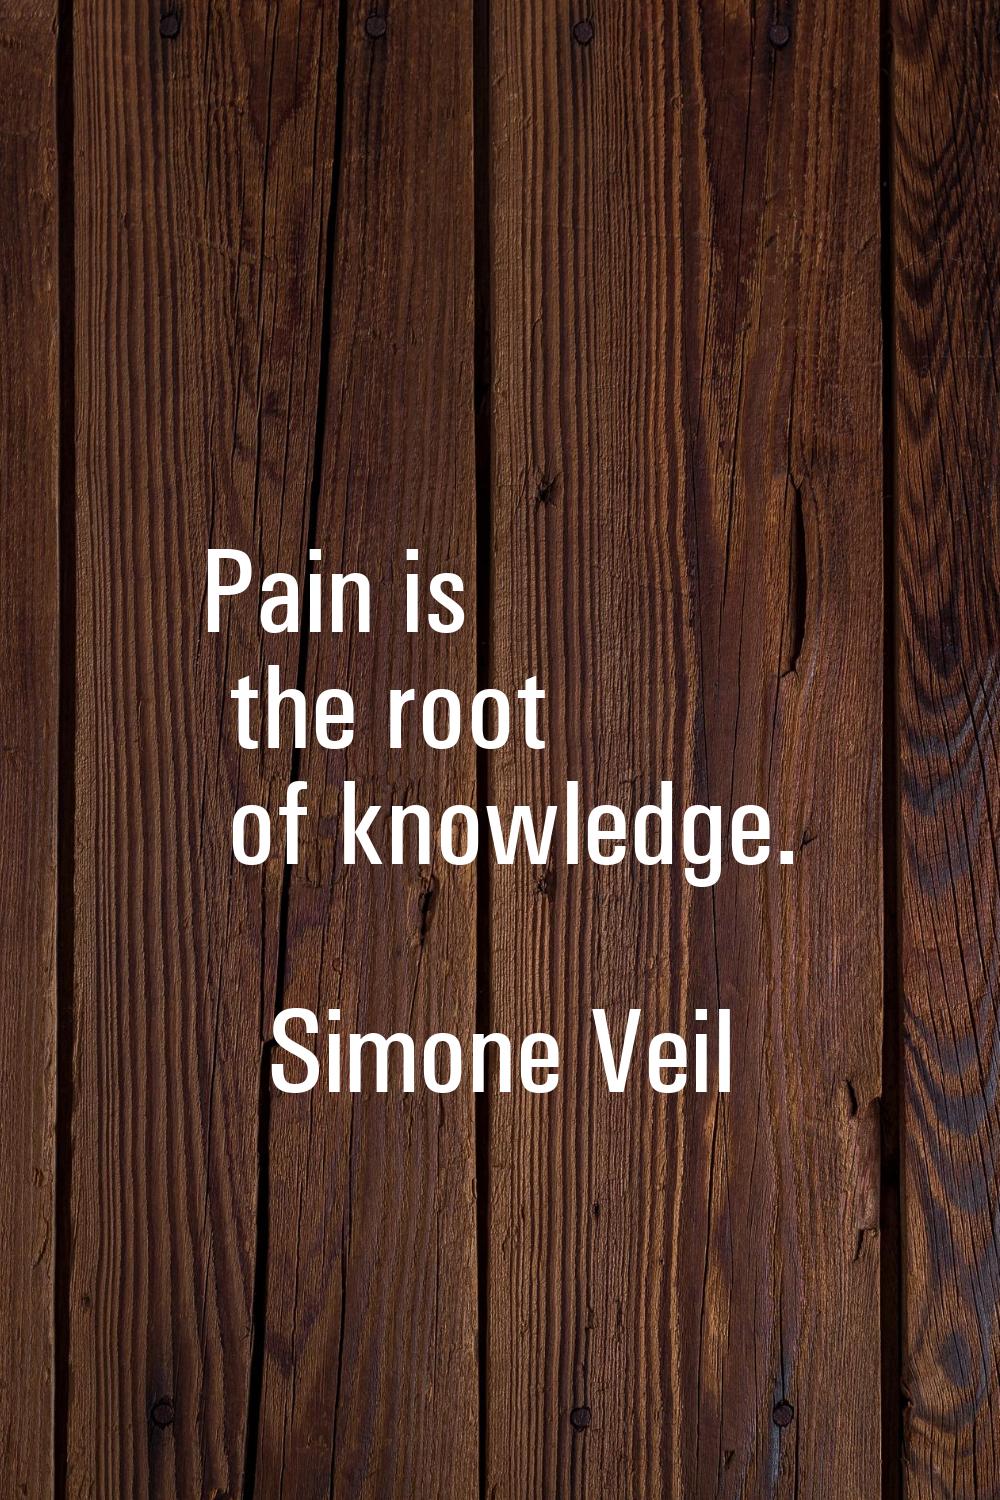 Pain is the root of knowledge.